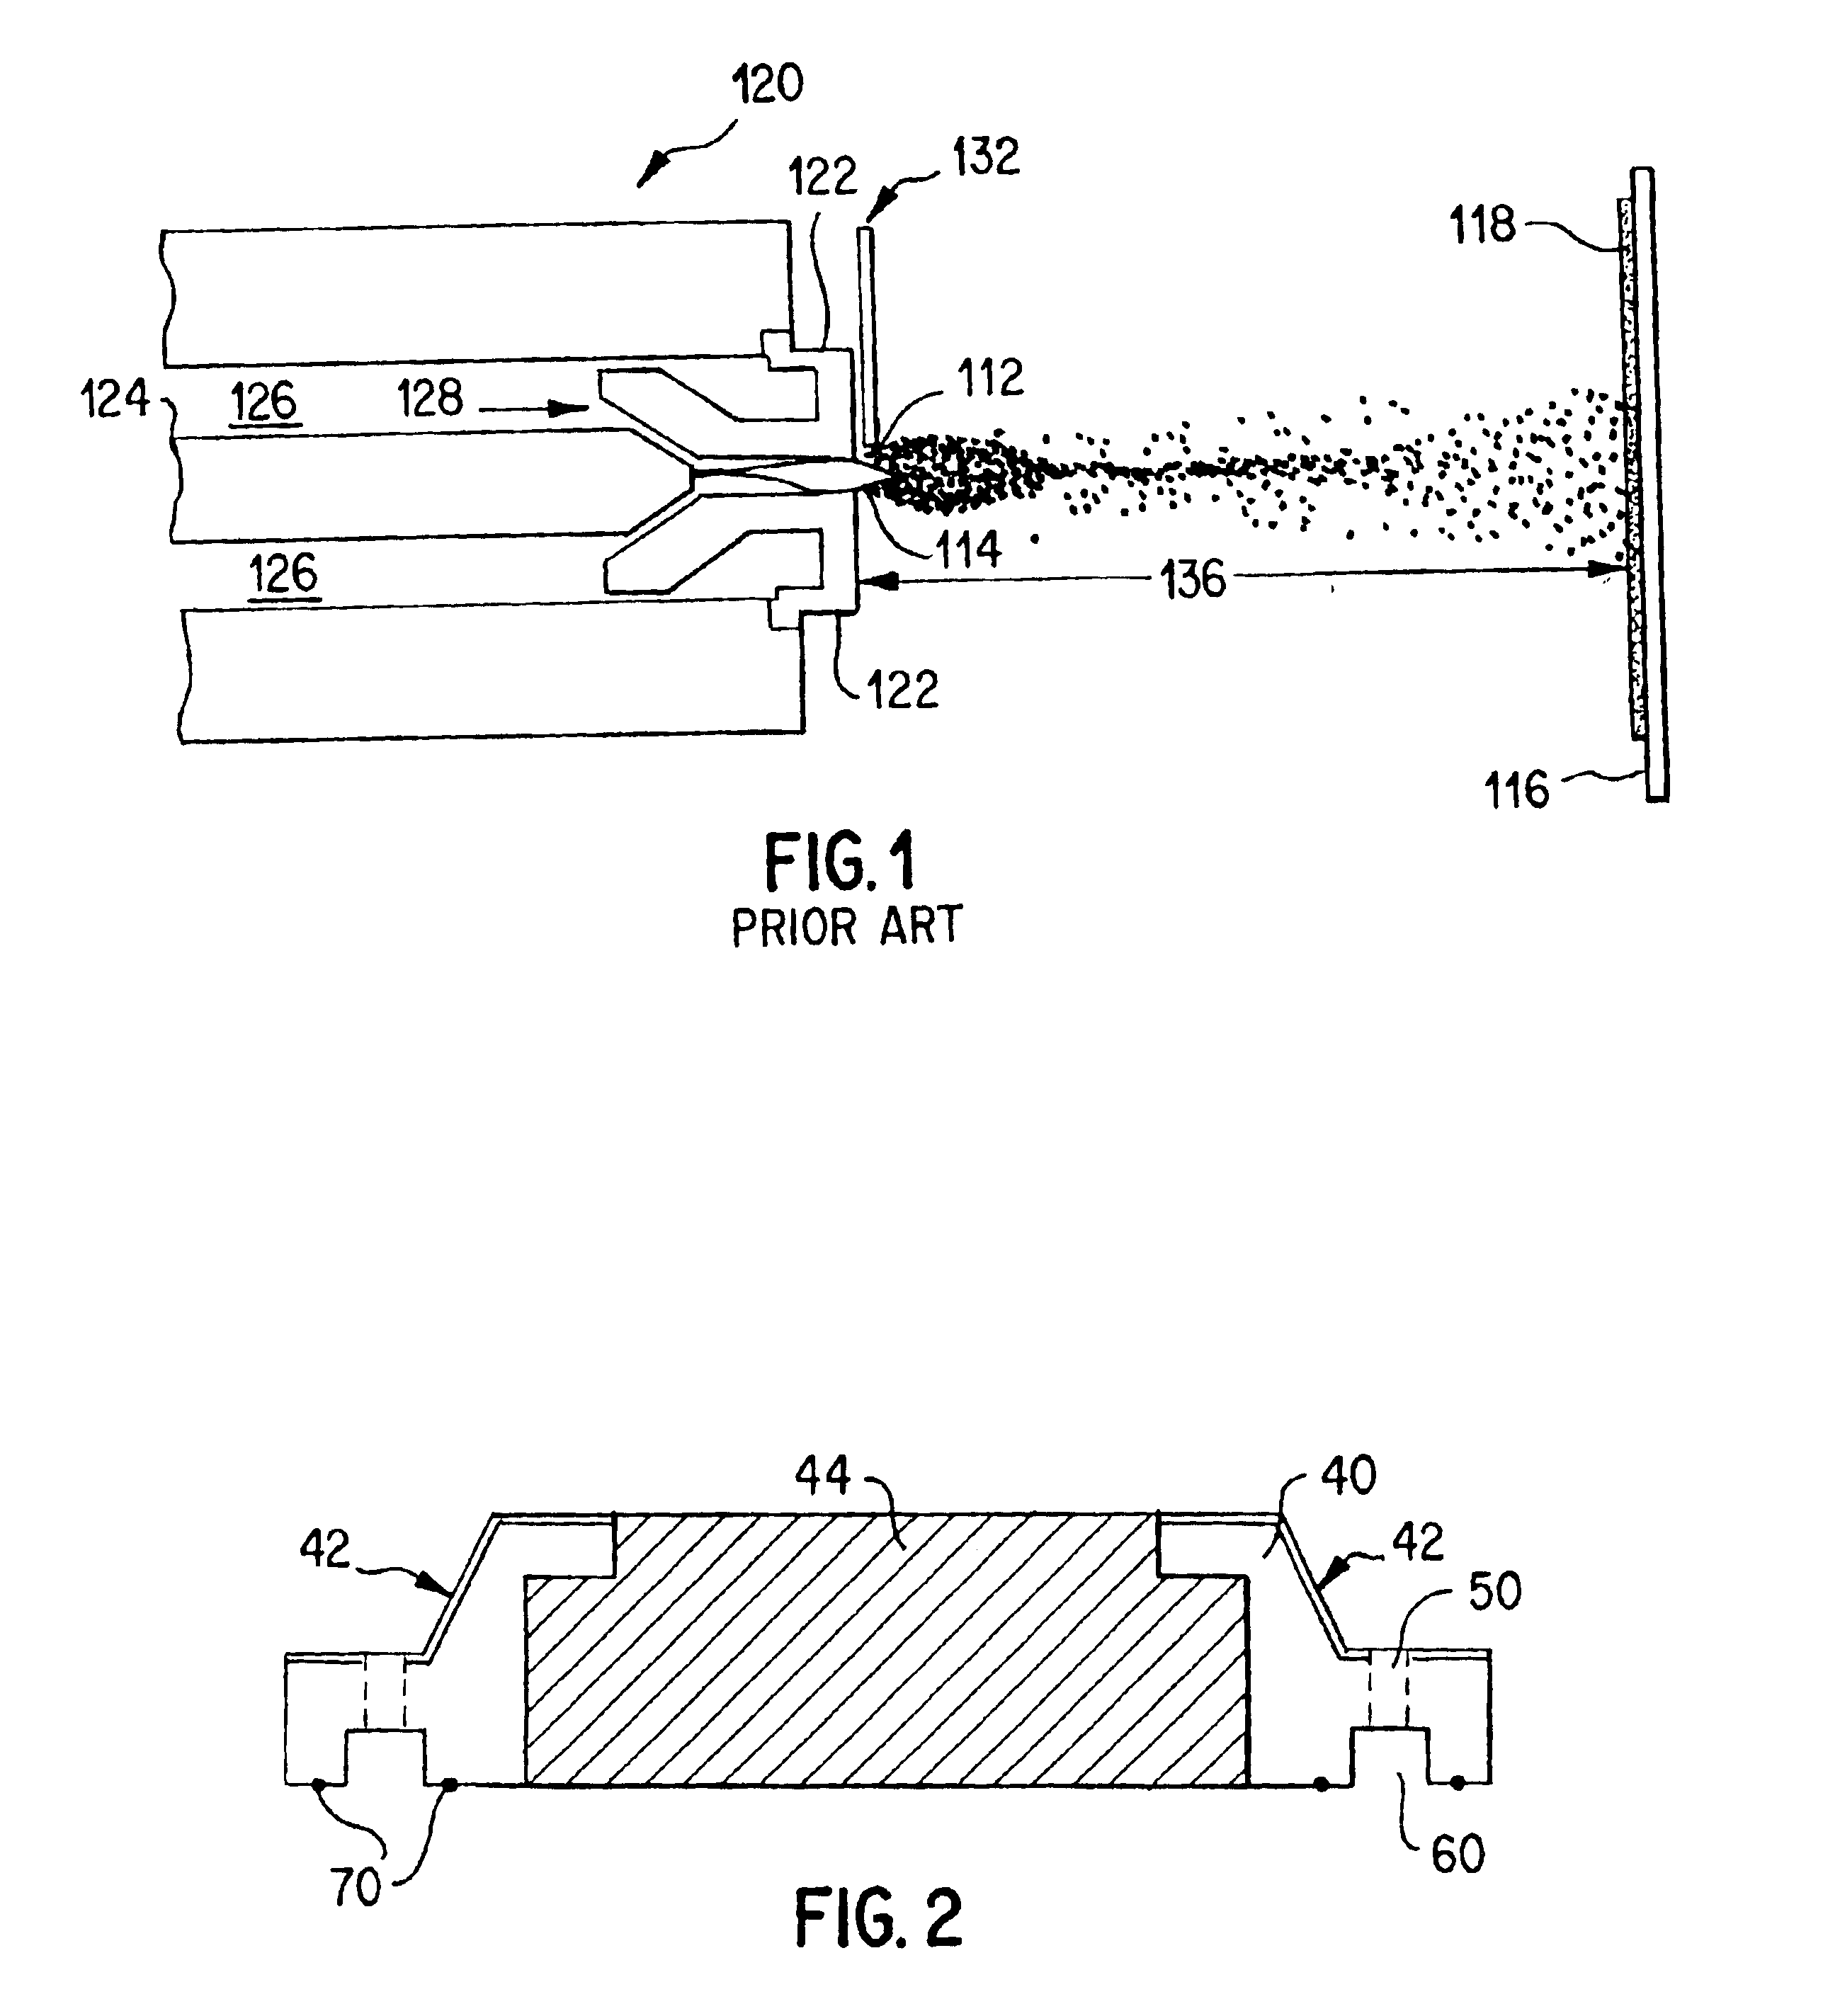 Cerium oxide containing ceramic components and coatings in semiconductor processing equipment and methods of manufacture thereof